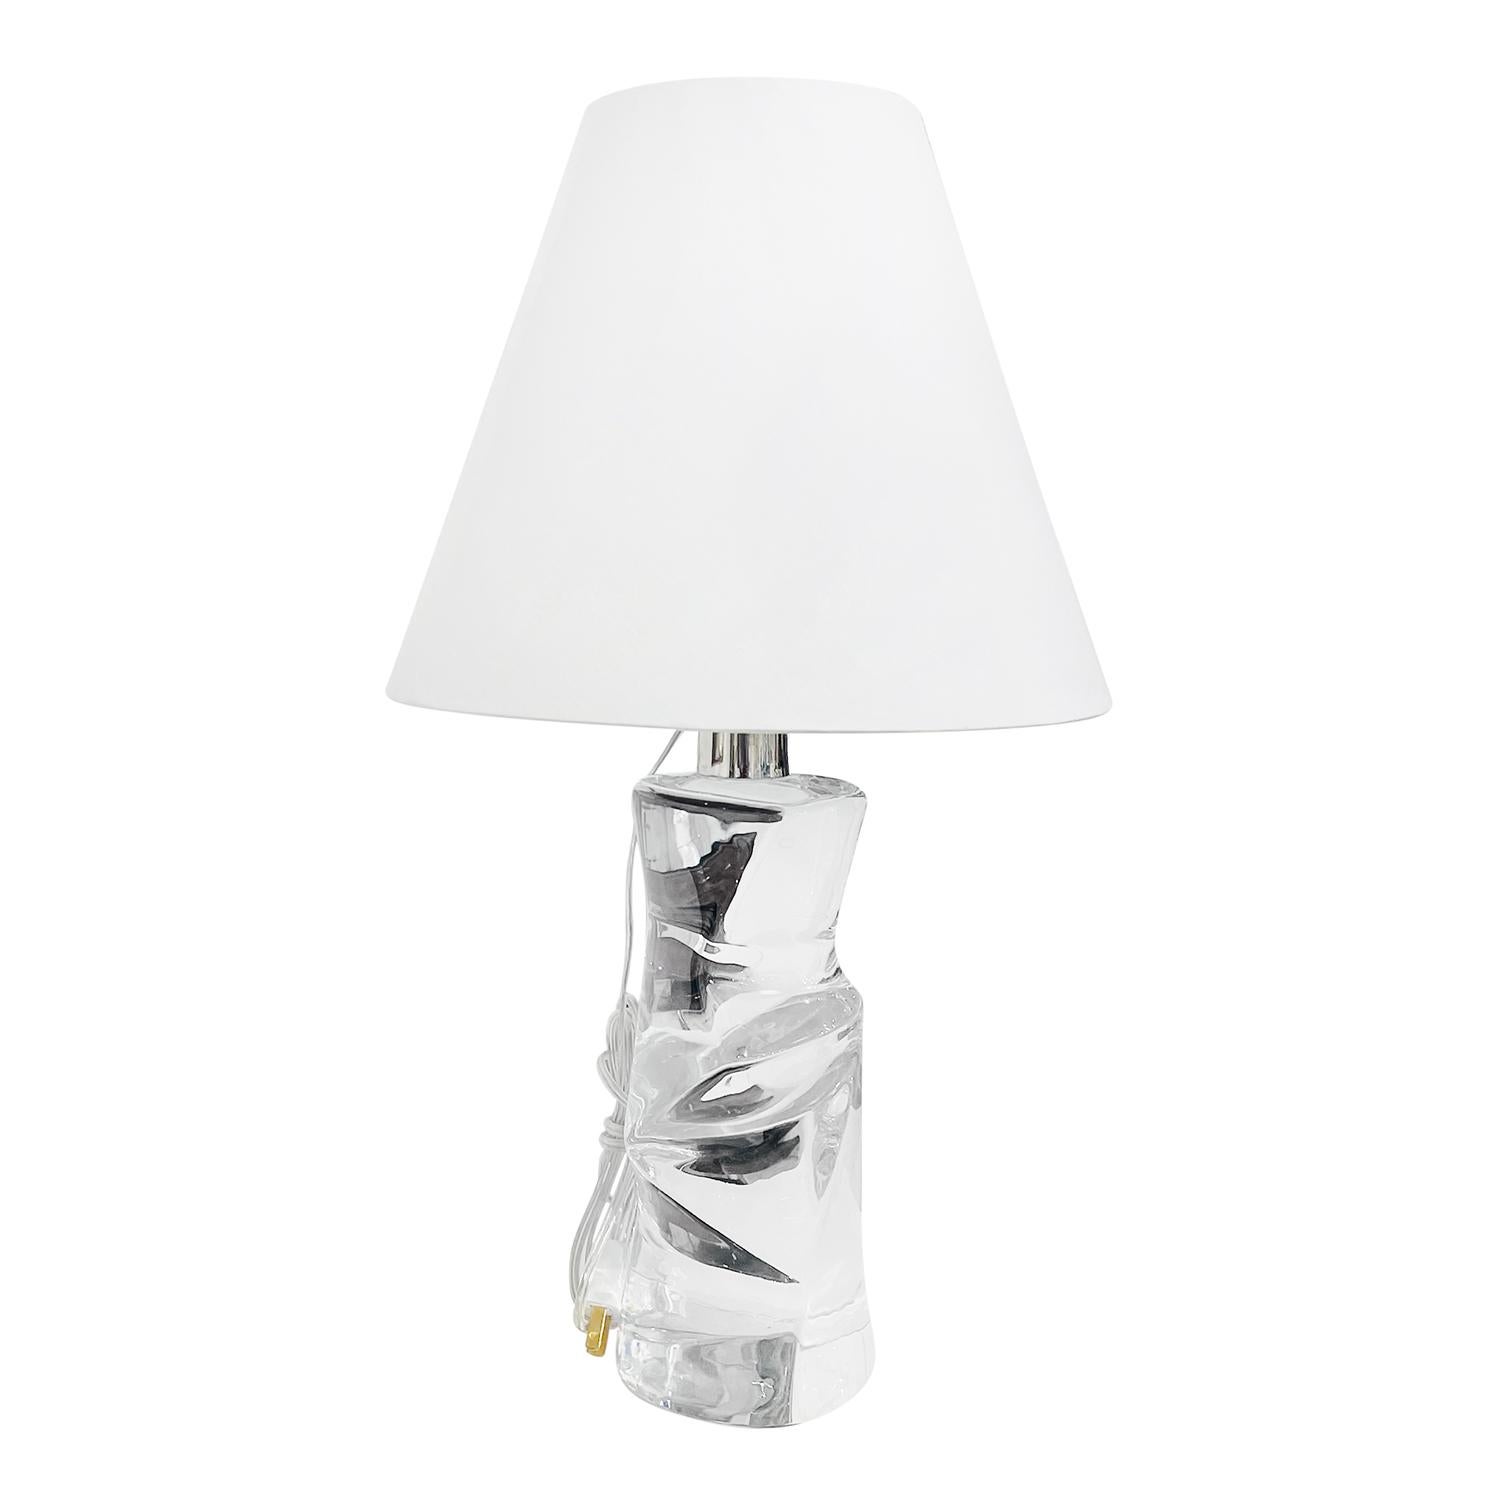 A sculptural, vintage Mid-Century modern Swedish table lamp with a new white round shade, made of hand blown slightly smoked glass designed by Olle Alberius and produced by Orrefors, in good condition. The detailed Scandinavian cylindrical desk